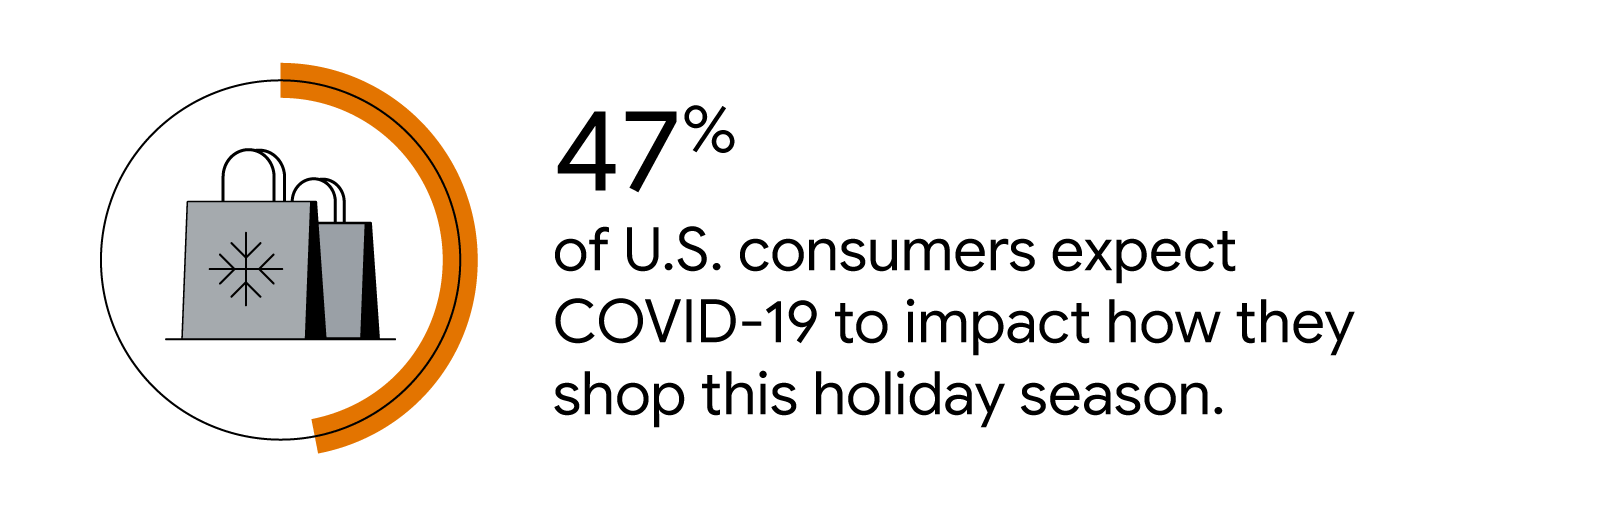 Shopping bags inside circle graph: 47% of U.S. consumers expect COVID-19 to impact how they shop this holiday season.